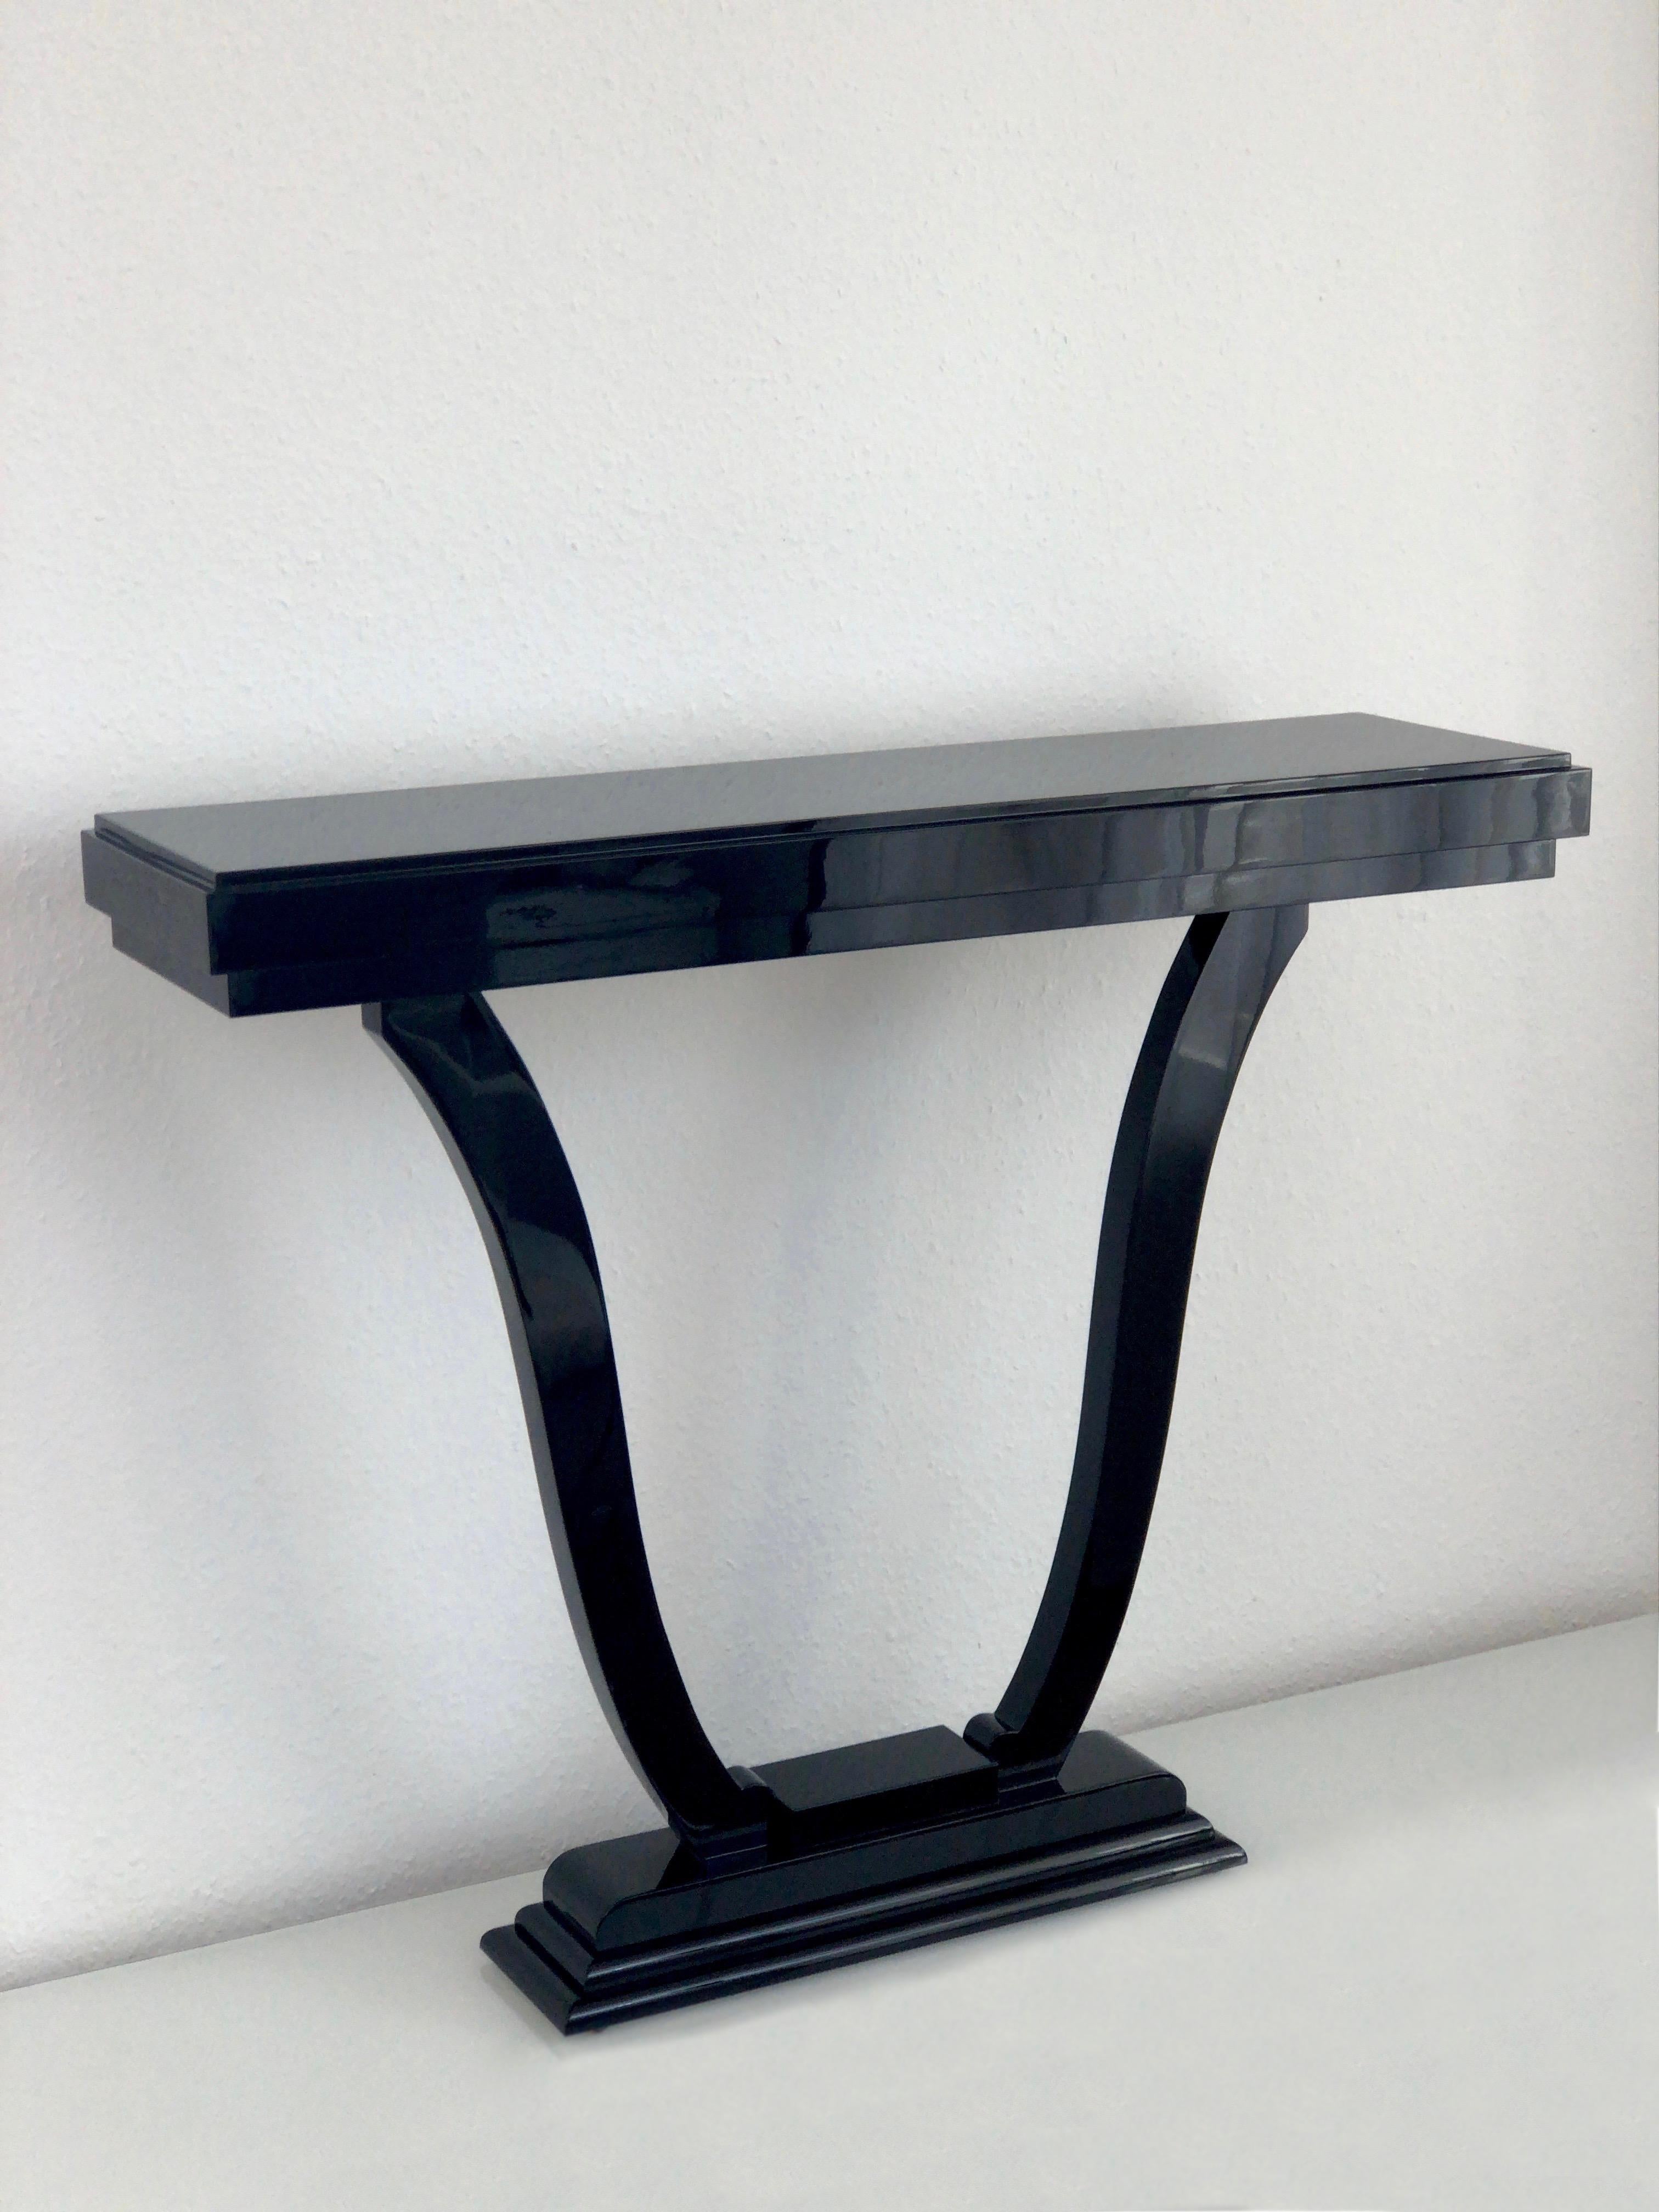 French 1930s Tulip Shaped Console Table in Black Piano Lacquer Art Deco France